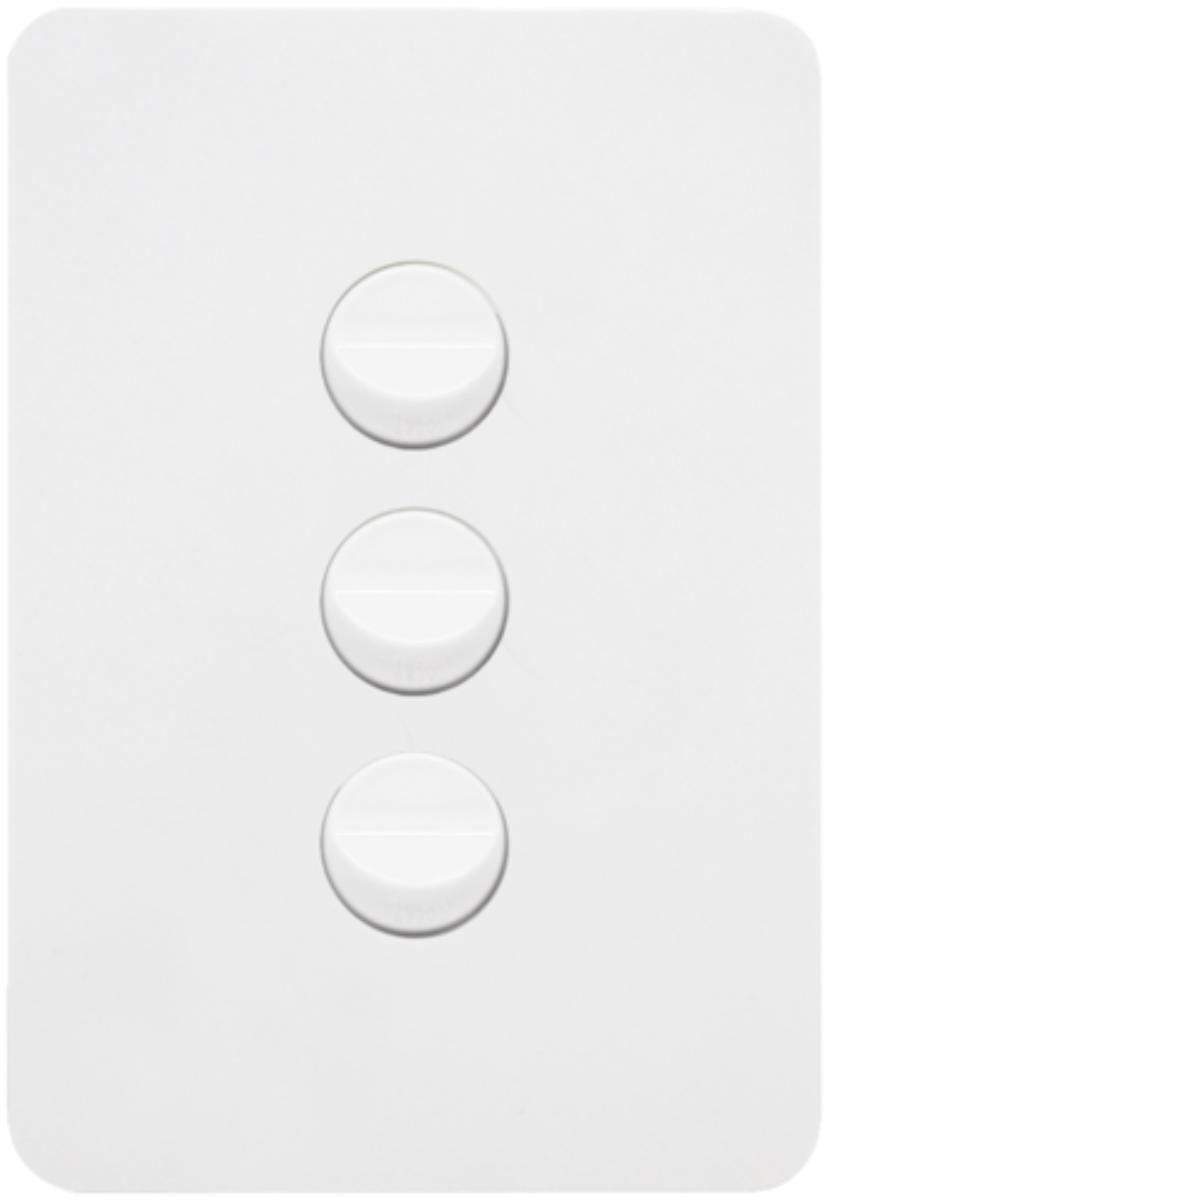 ALLURE 3 GANG SWITCH 16A 2WAY GLOSS WHT